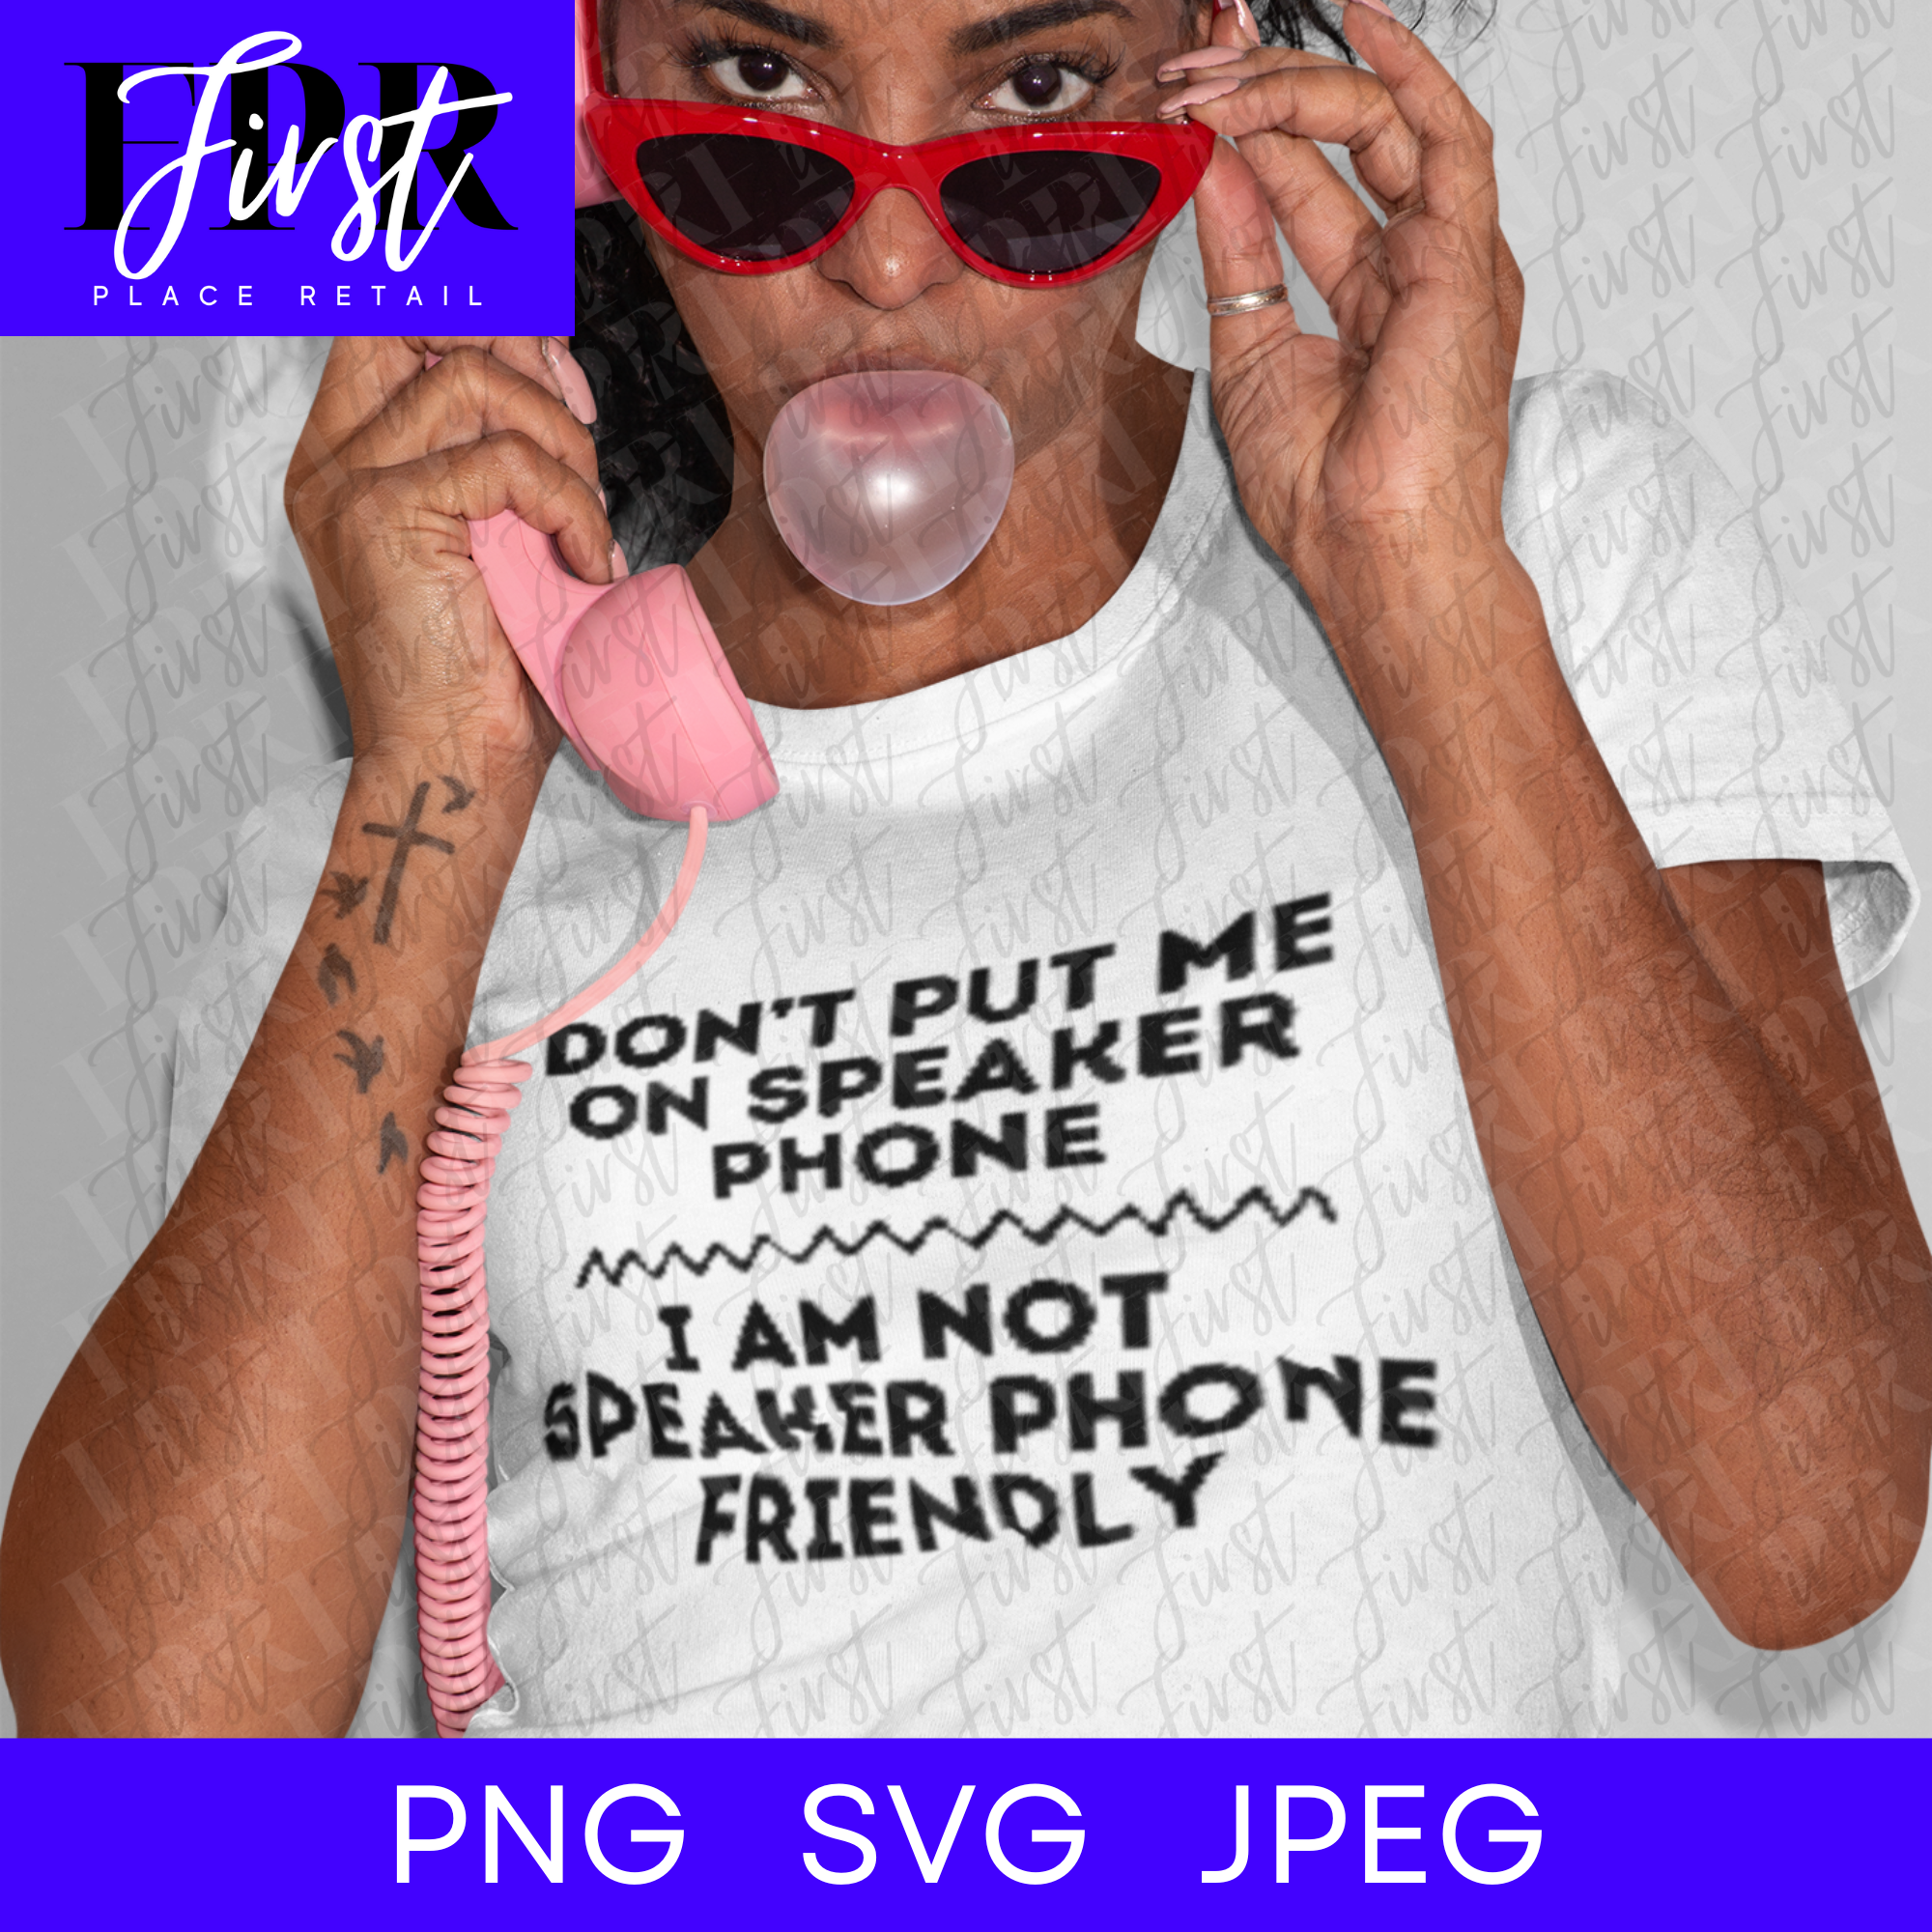 Don’t Put Me On Speaker Phone SVG Cut File, Printable png and jpeg for Iron On Transfer. Instant Download. (Digital Art)